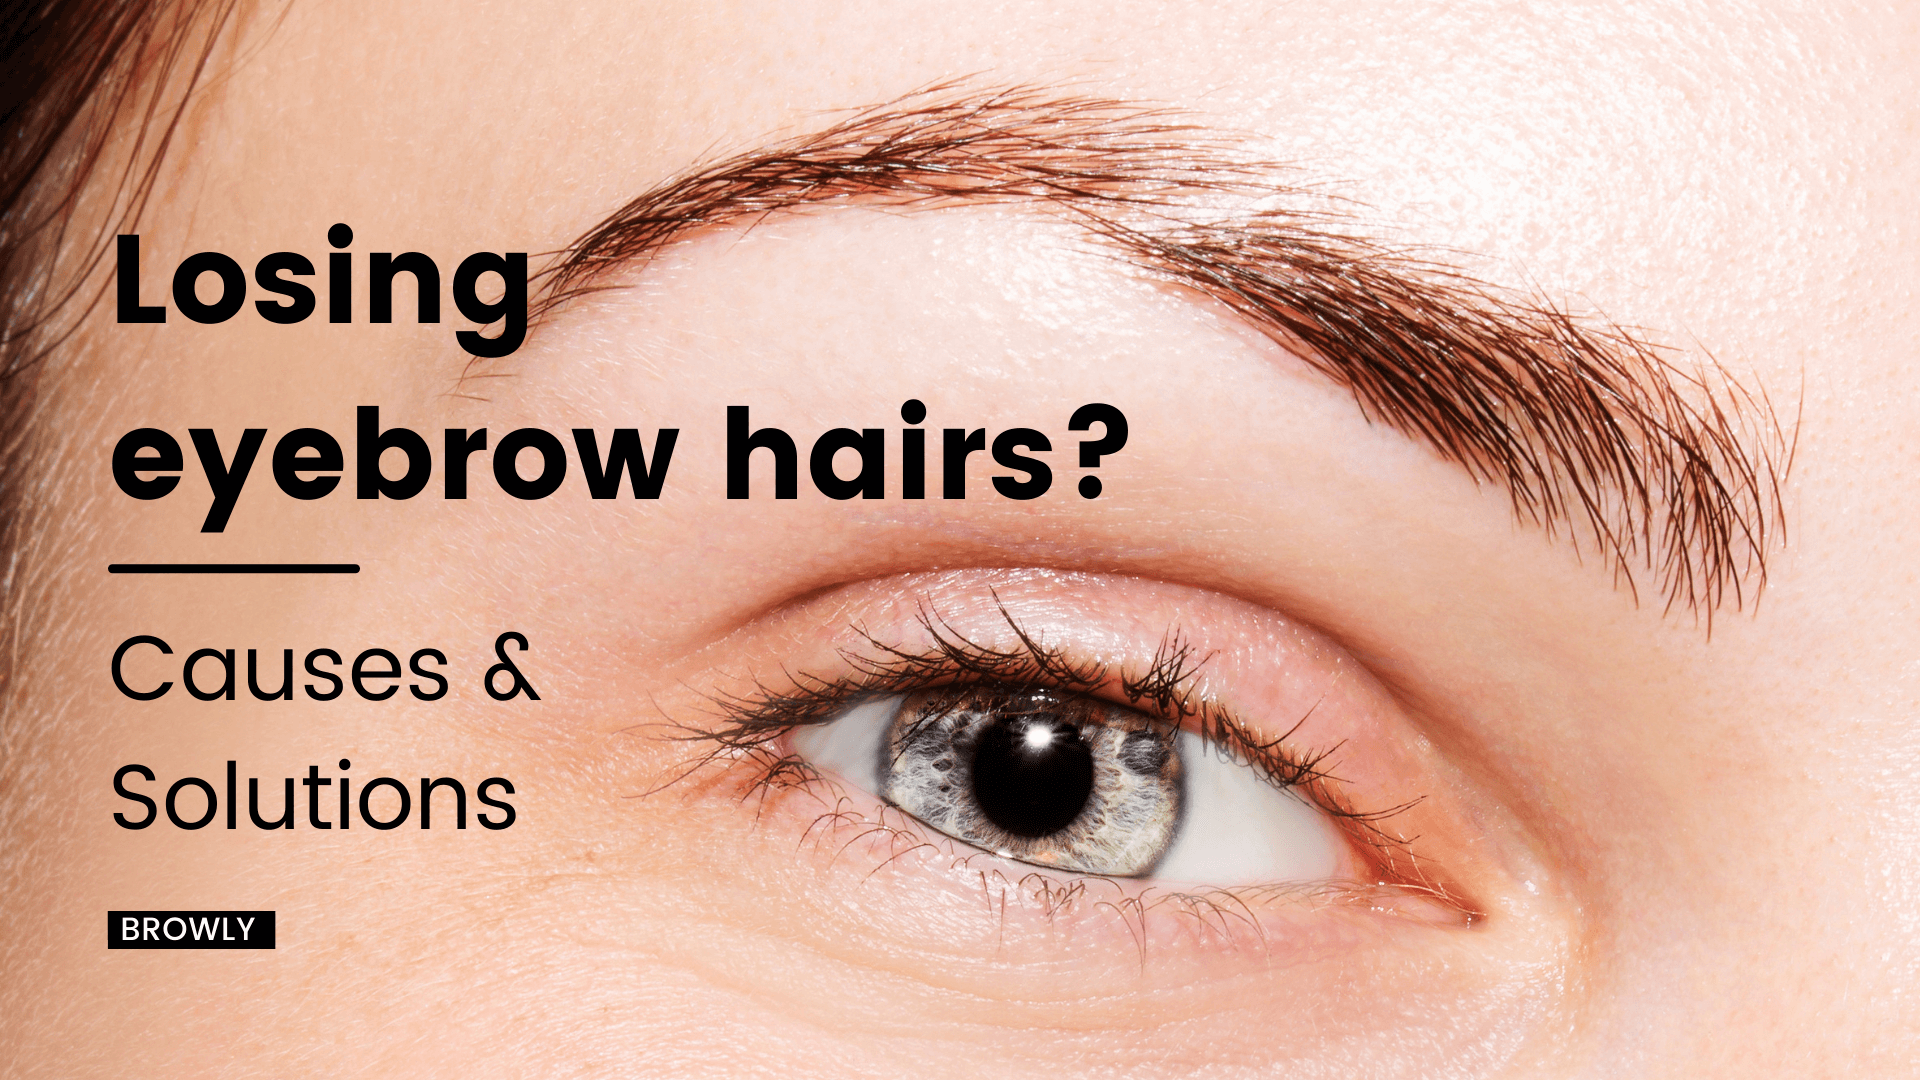 https://cdn.shopify.com/s/files/1/0262/7577/4548/products/Brow_hair_loss_reasons_and_solutions.png?v=1647862532